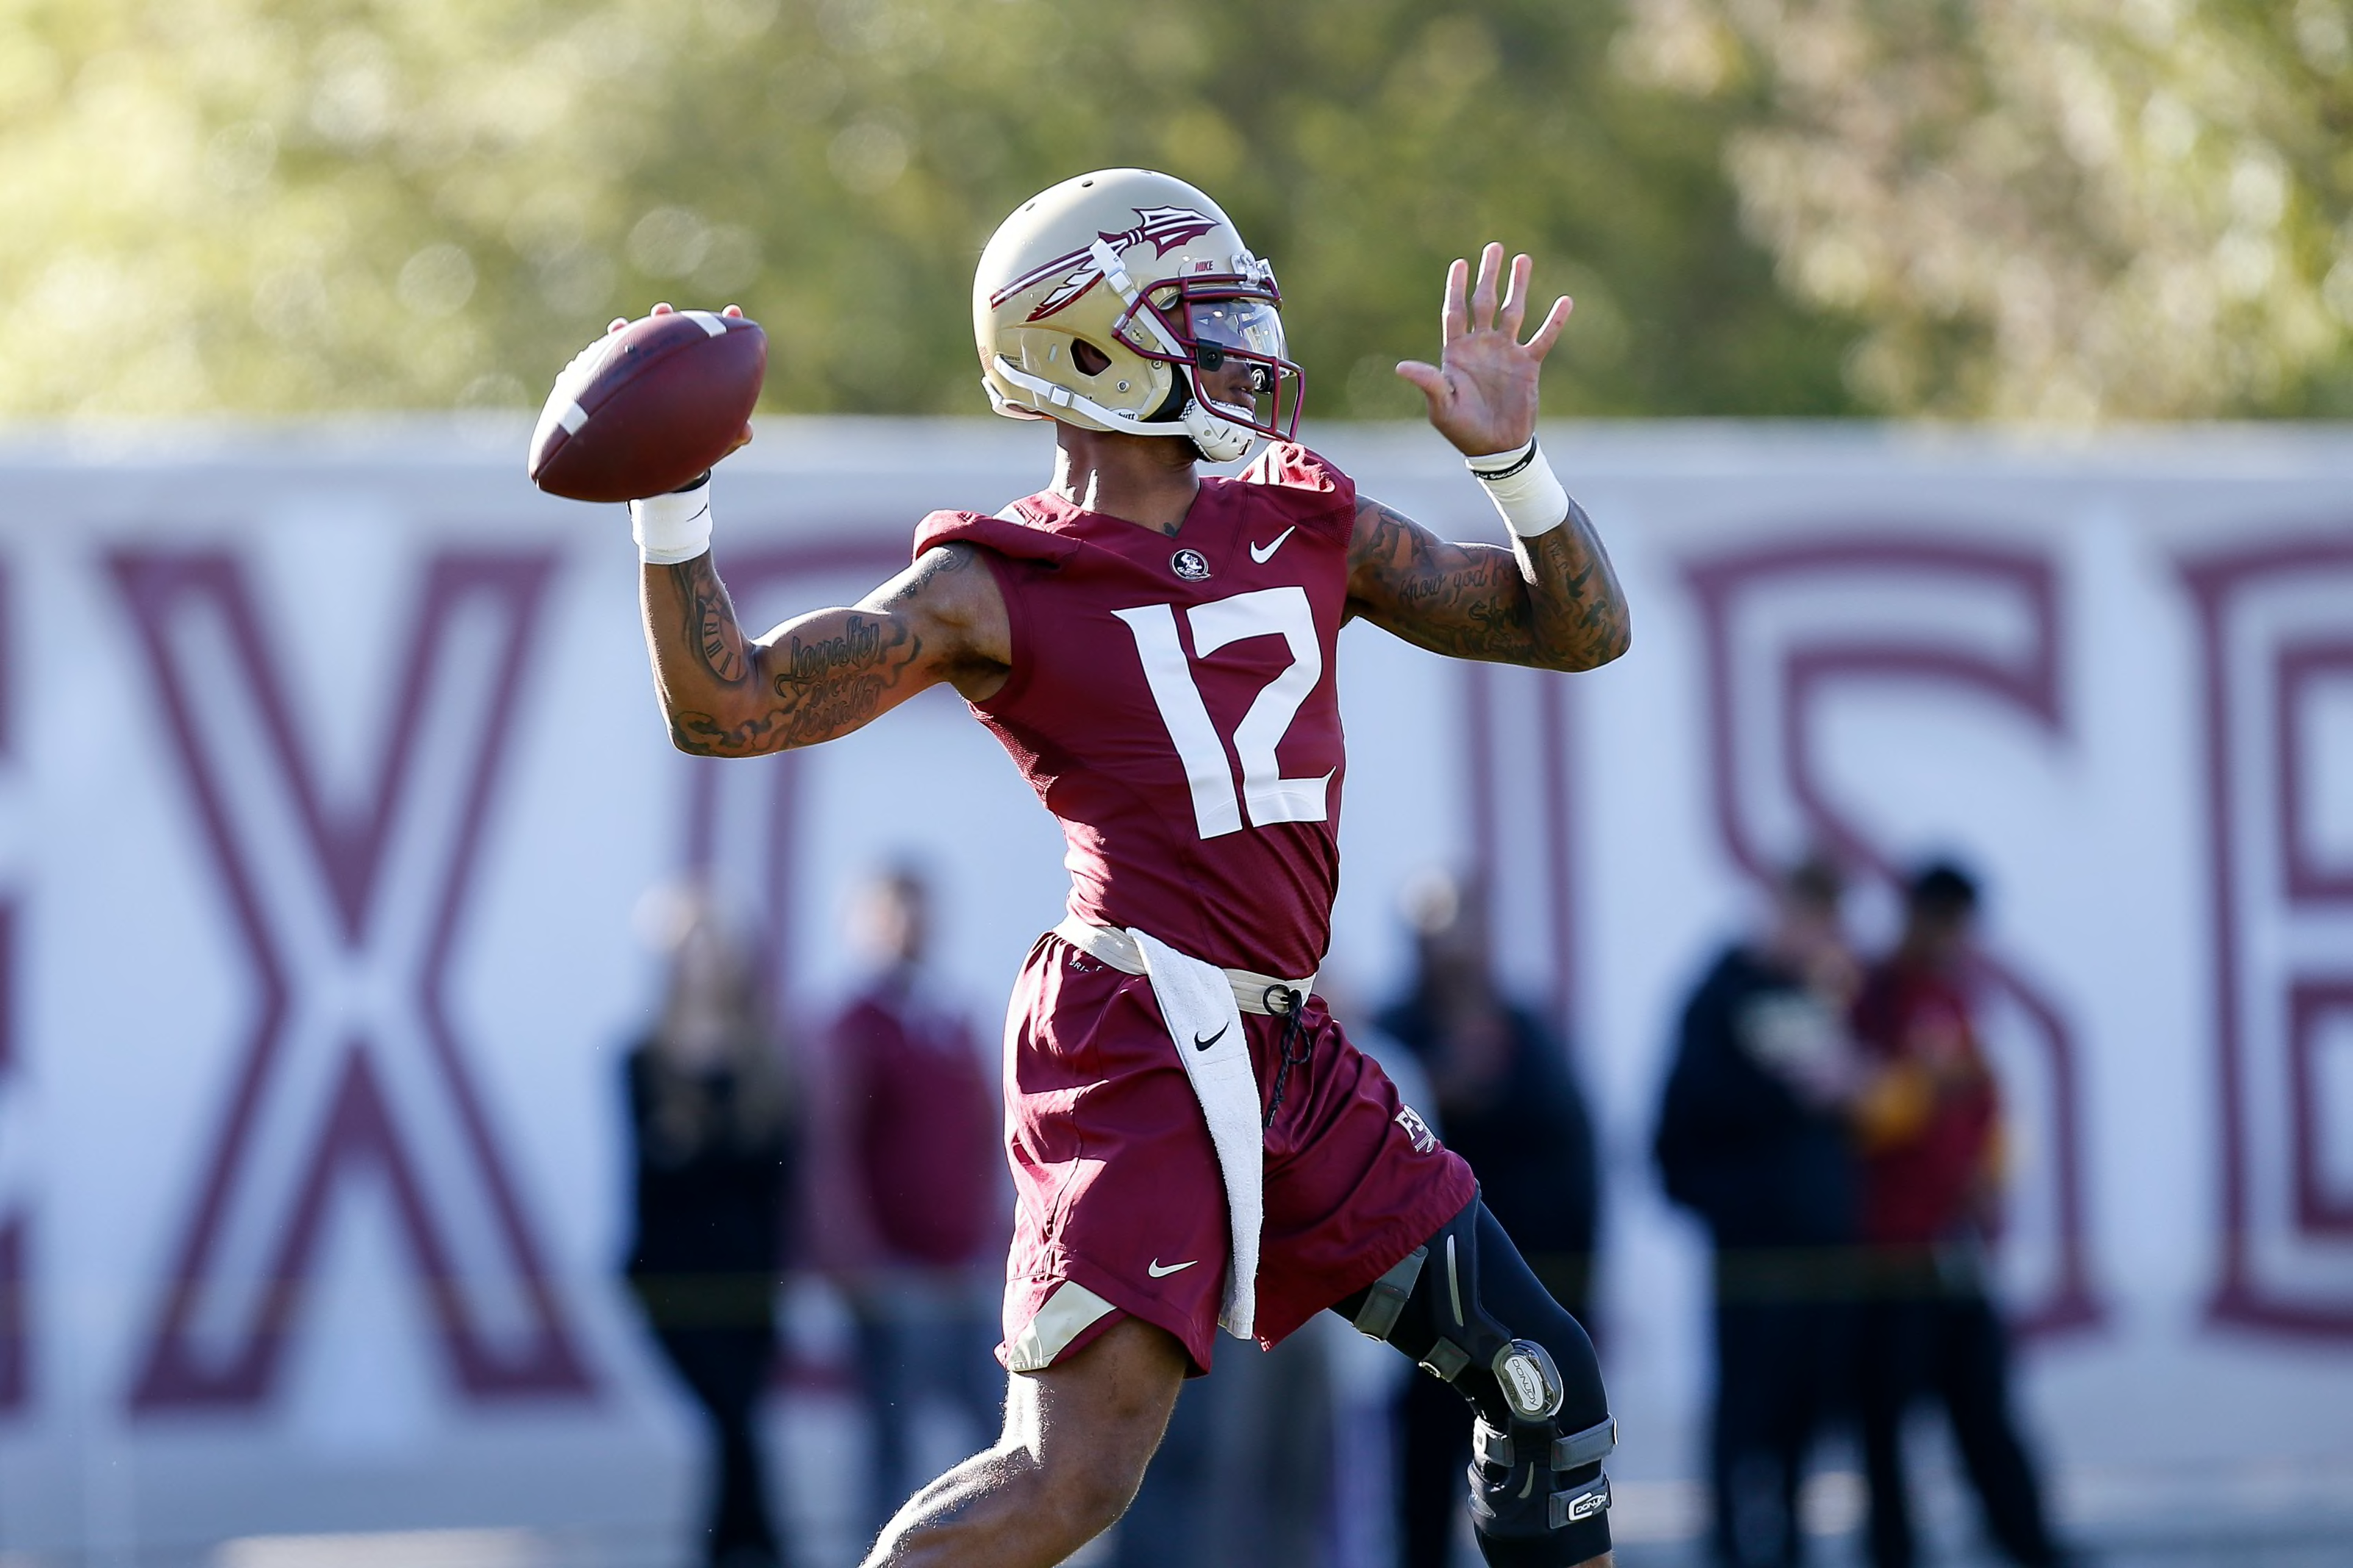 Virginia Tech vs. Florida State Preview, predictions, TV schedule and more